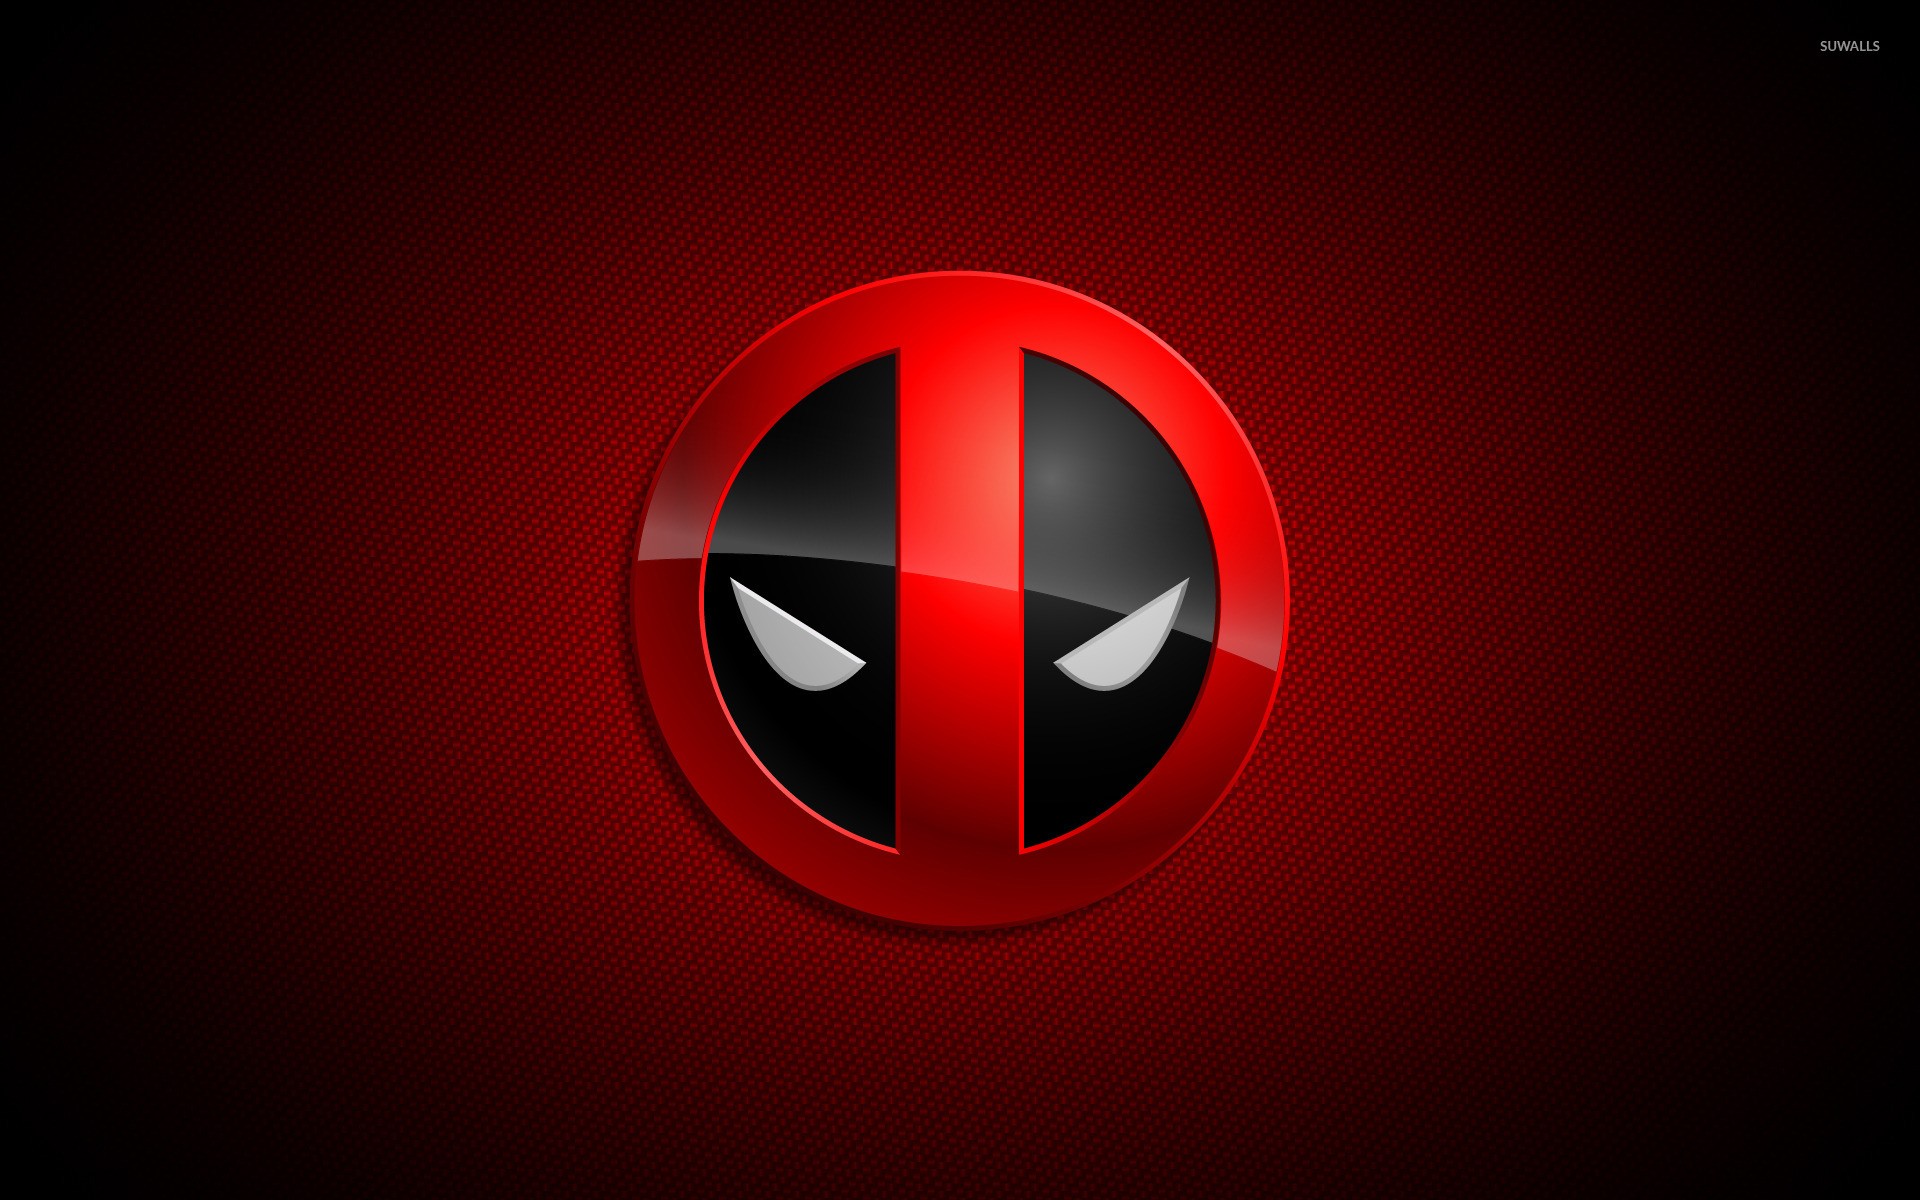 27 Deadpool  wallpapers    Download free cool full HD  